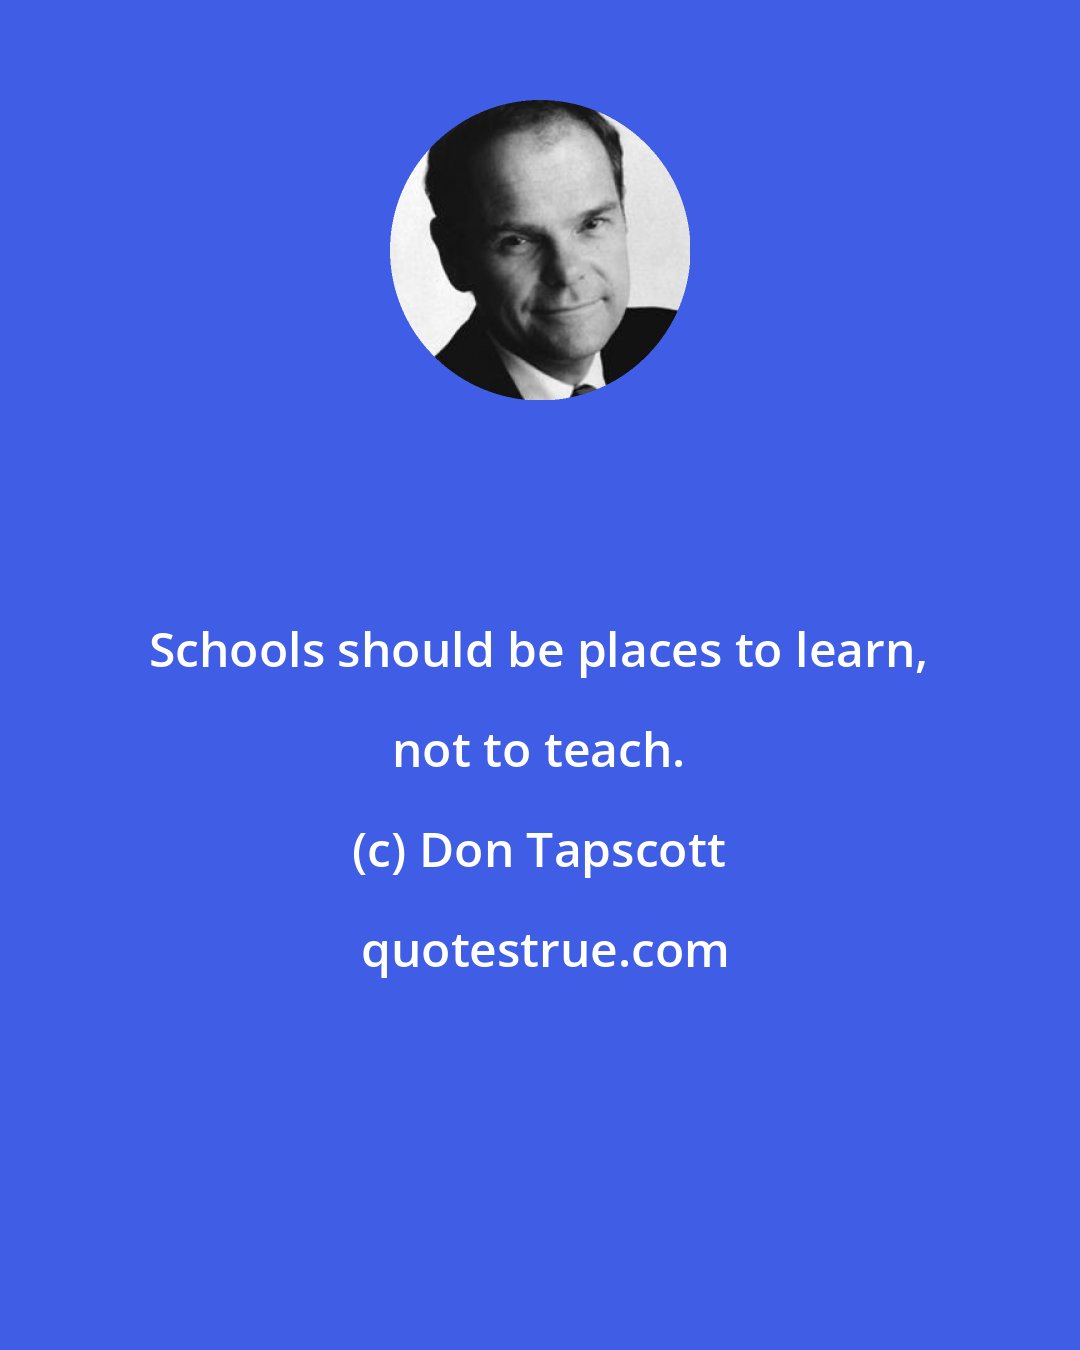 Don Tapscott: Schools should be places to learn, not to teach.